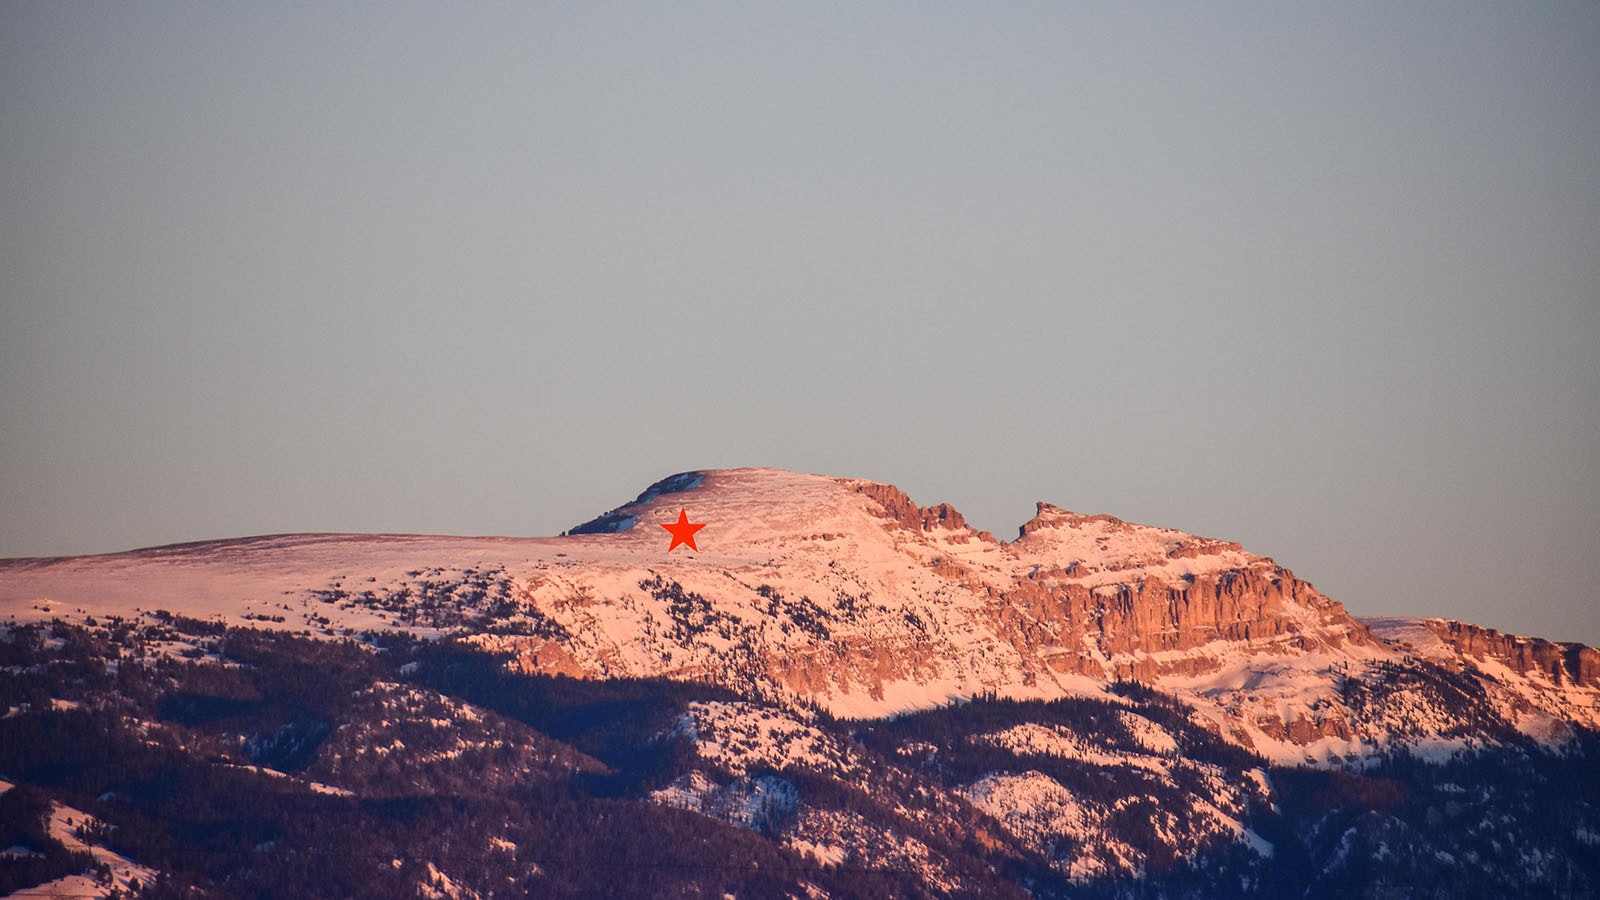 The red star marks the spot where a C-130 with nine on board slammed into a mountain above Jackson, Wyoming, in 1996.